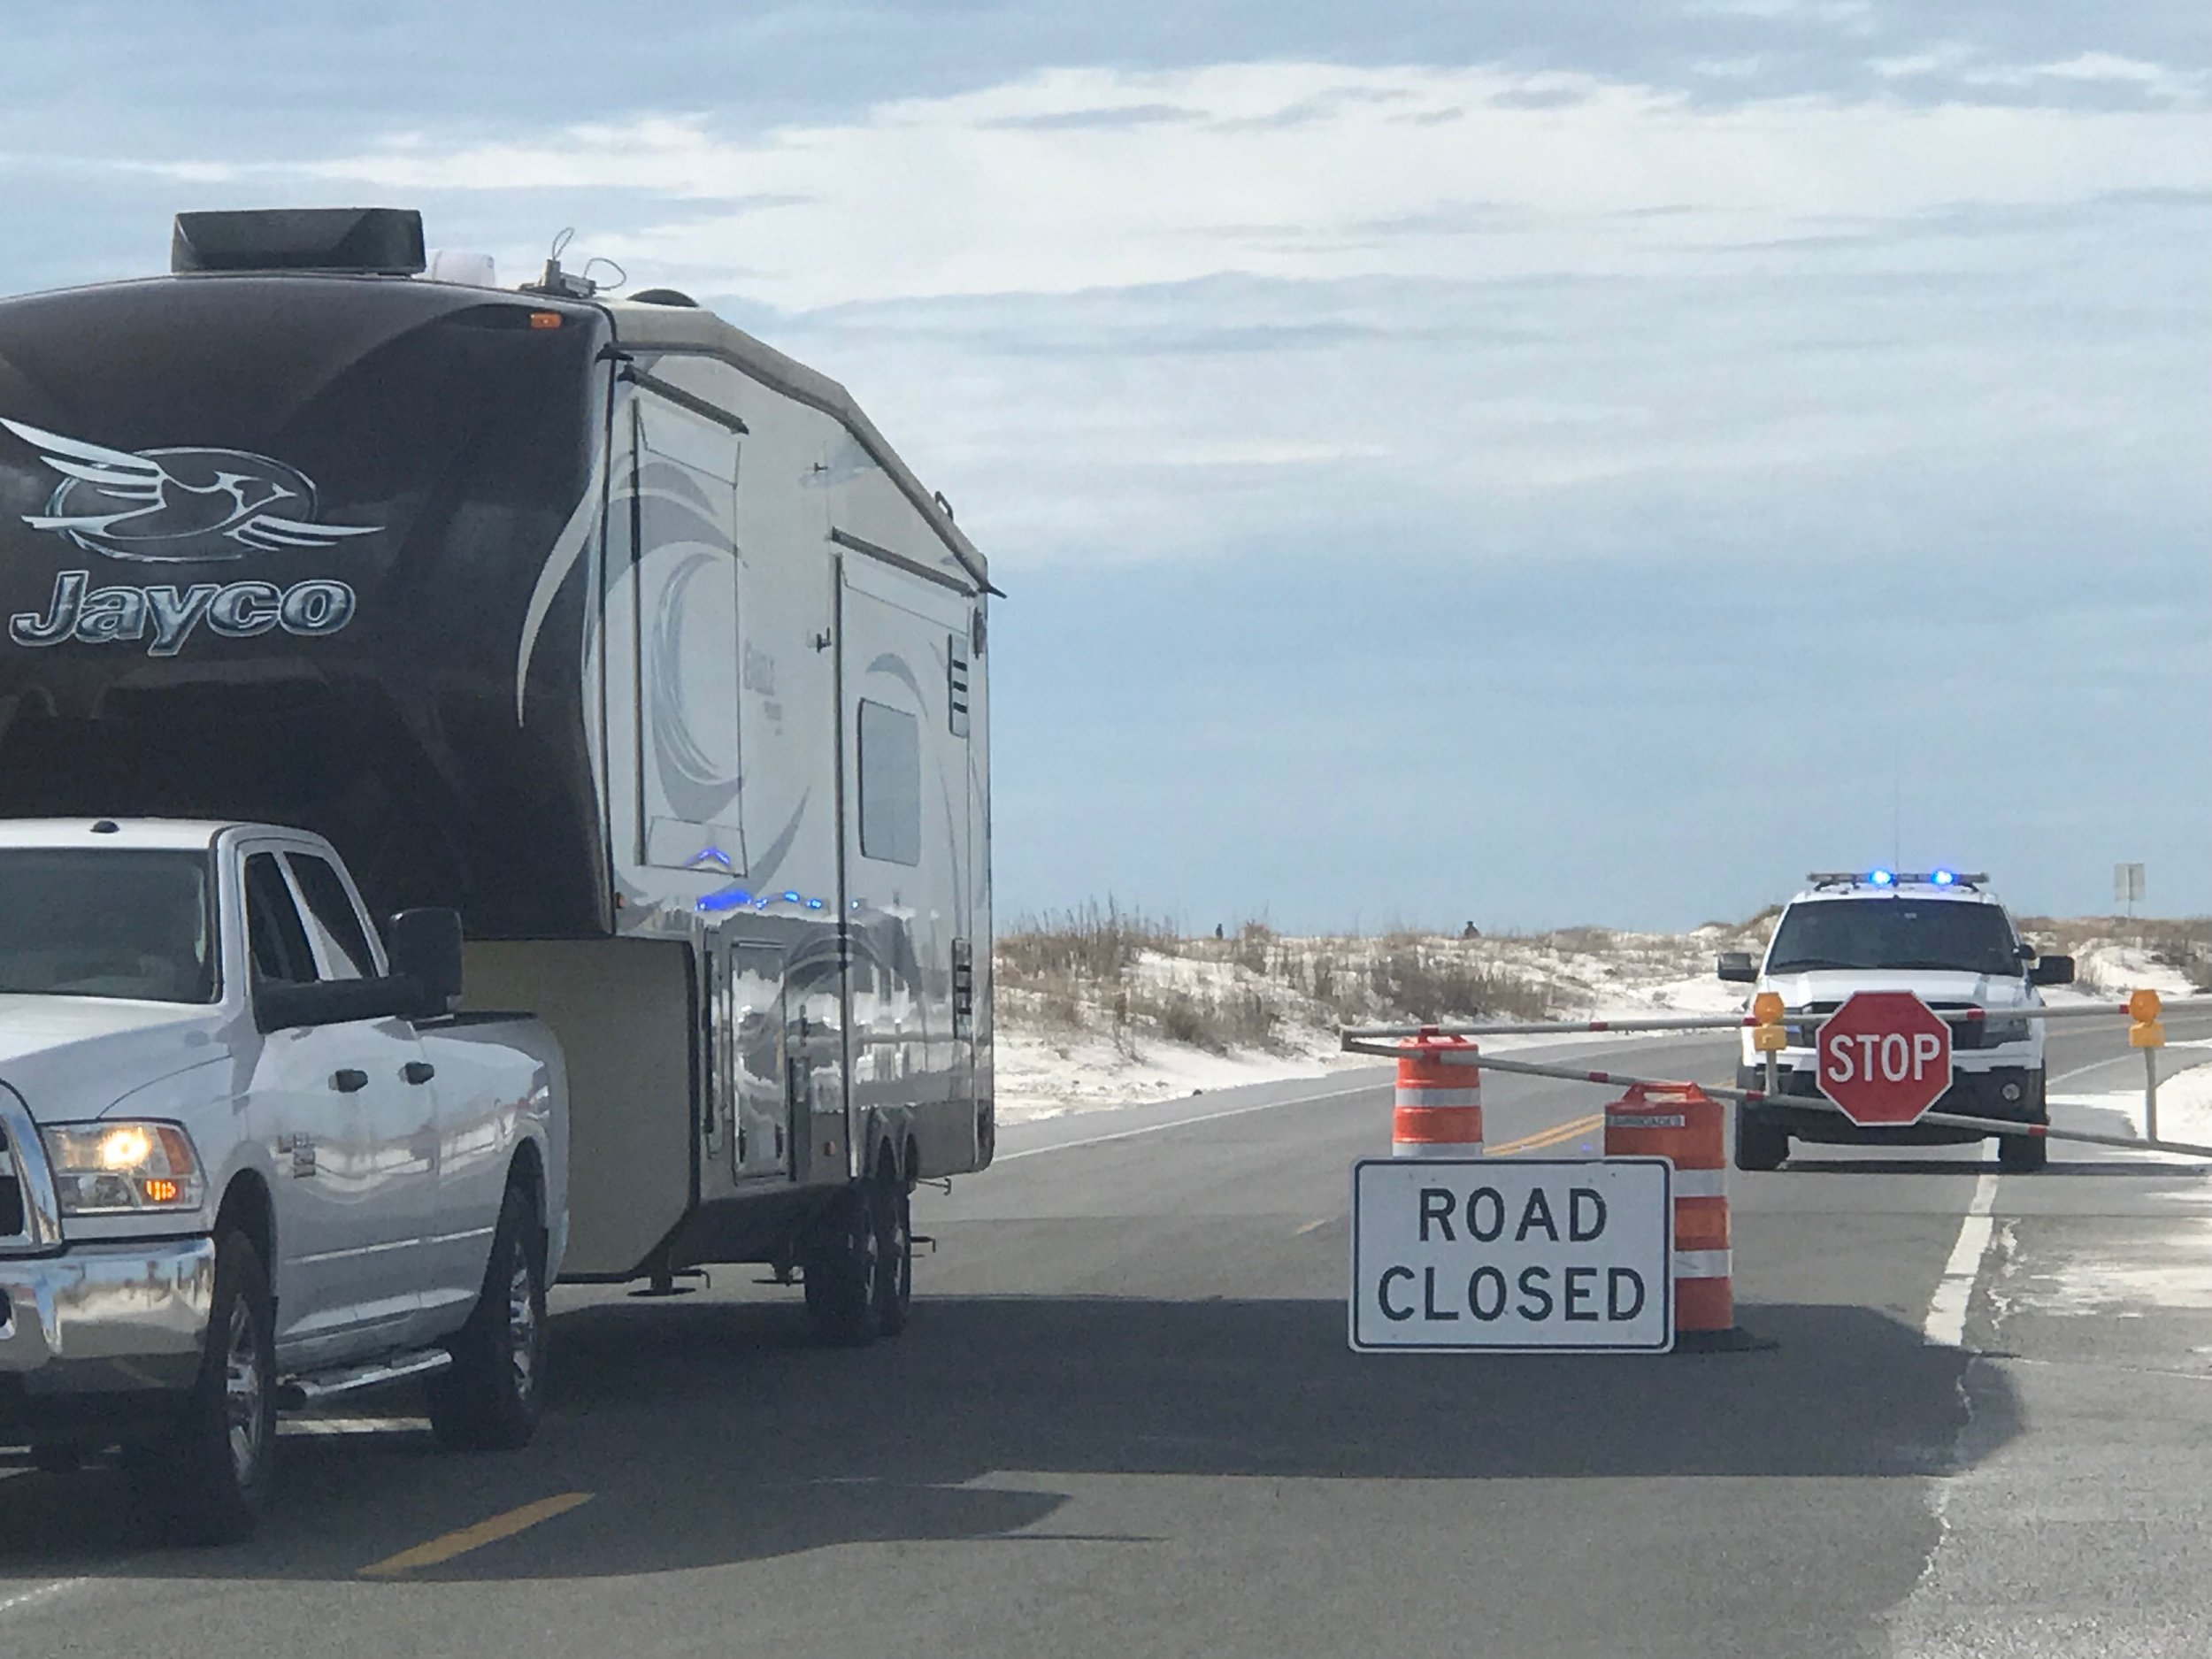  Gulf Islands National Seashore was closed, and campers evicted, when the federal government shut down Jan. 20. 